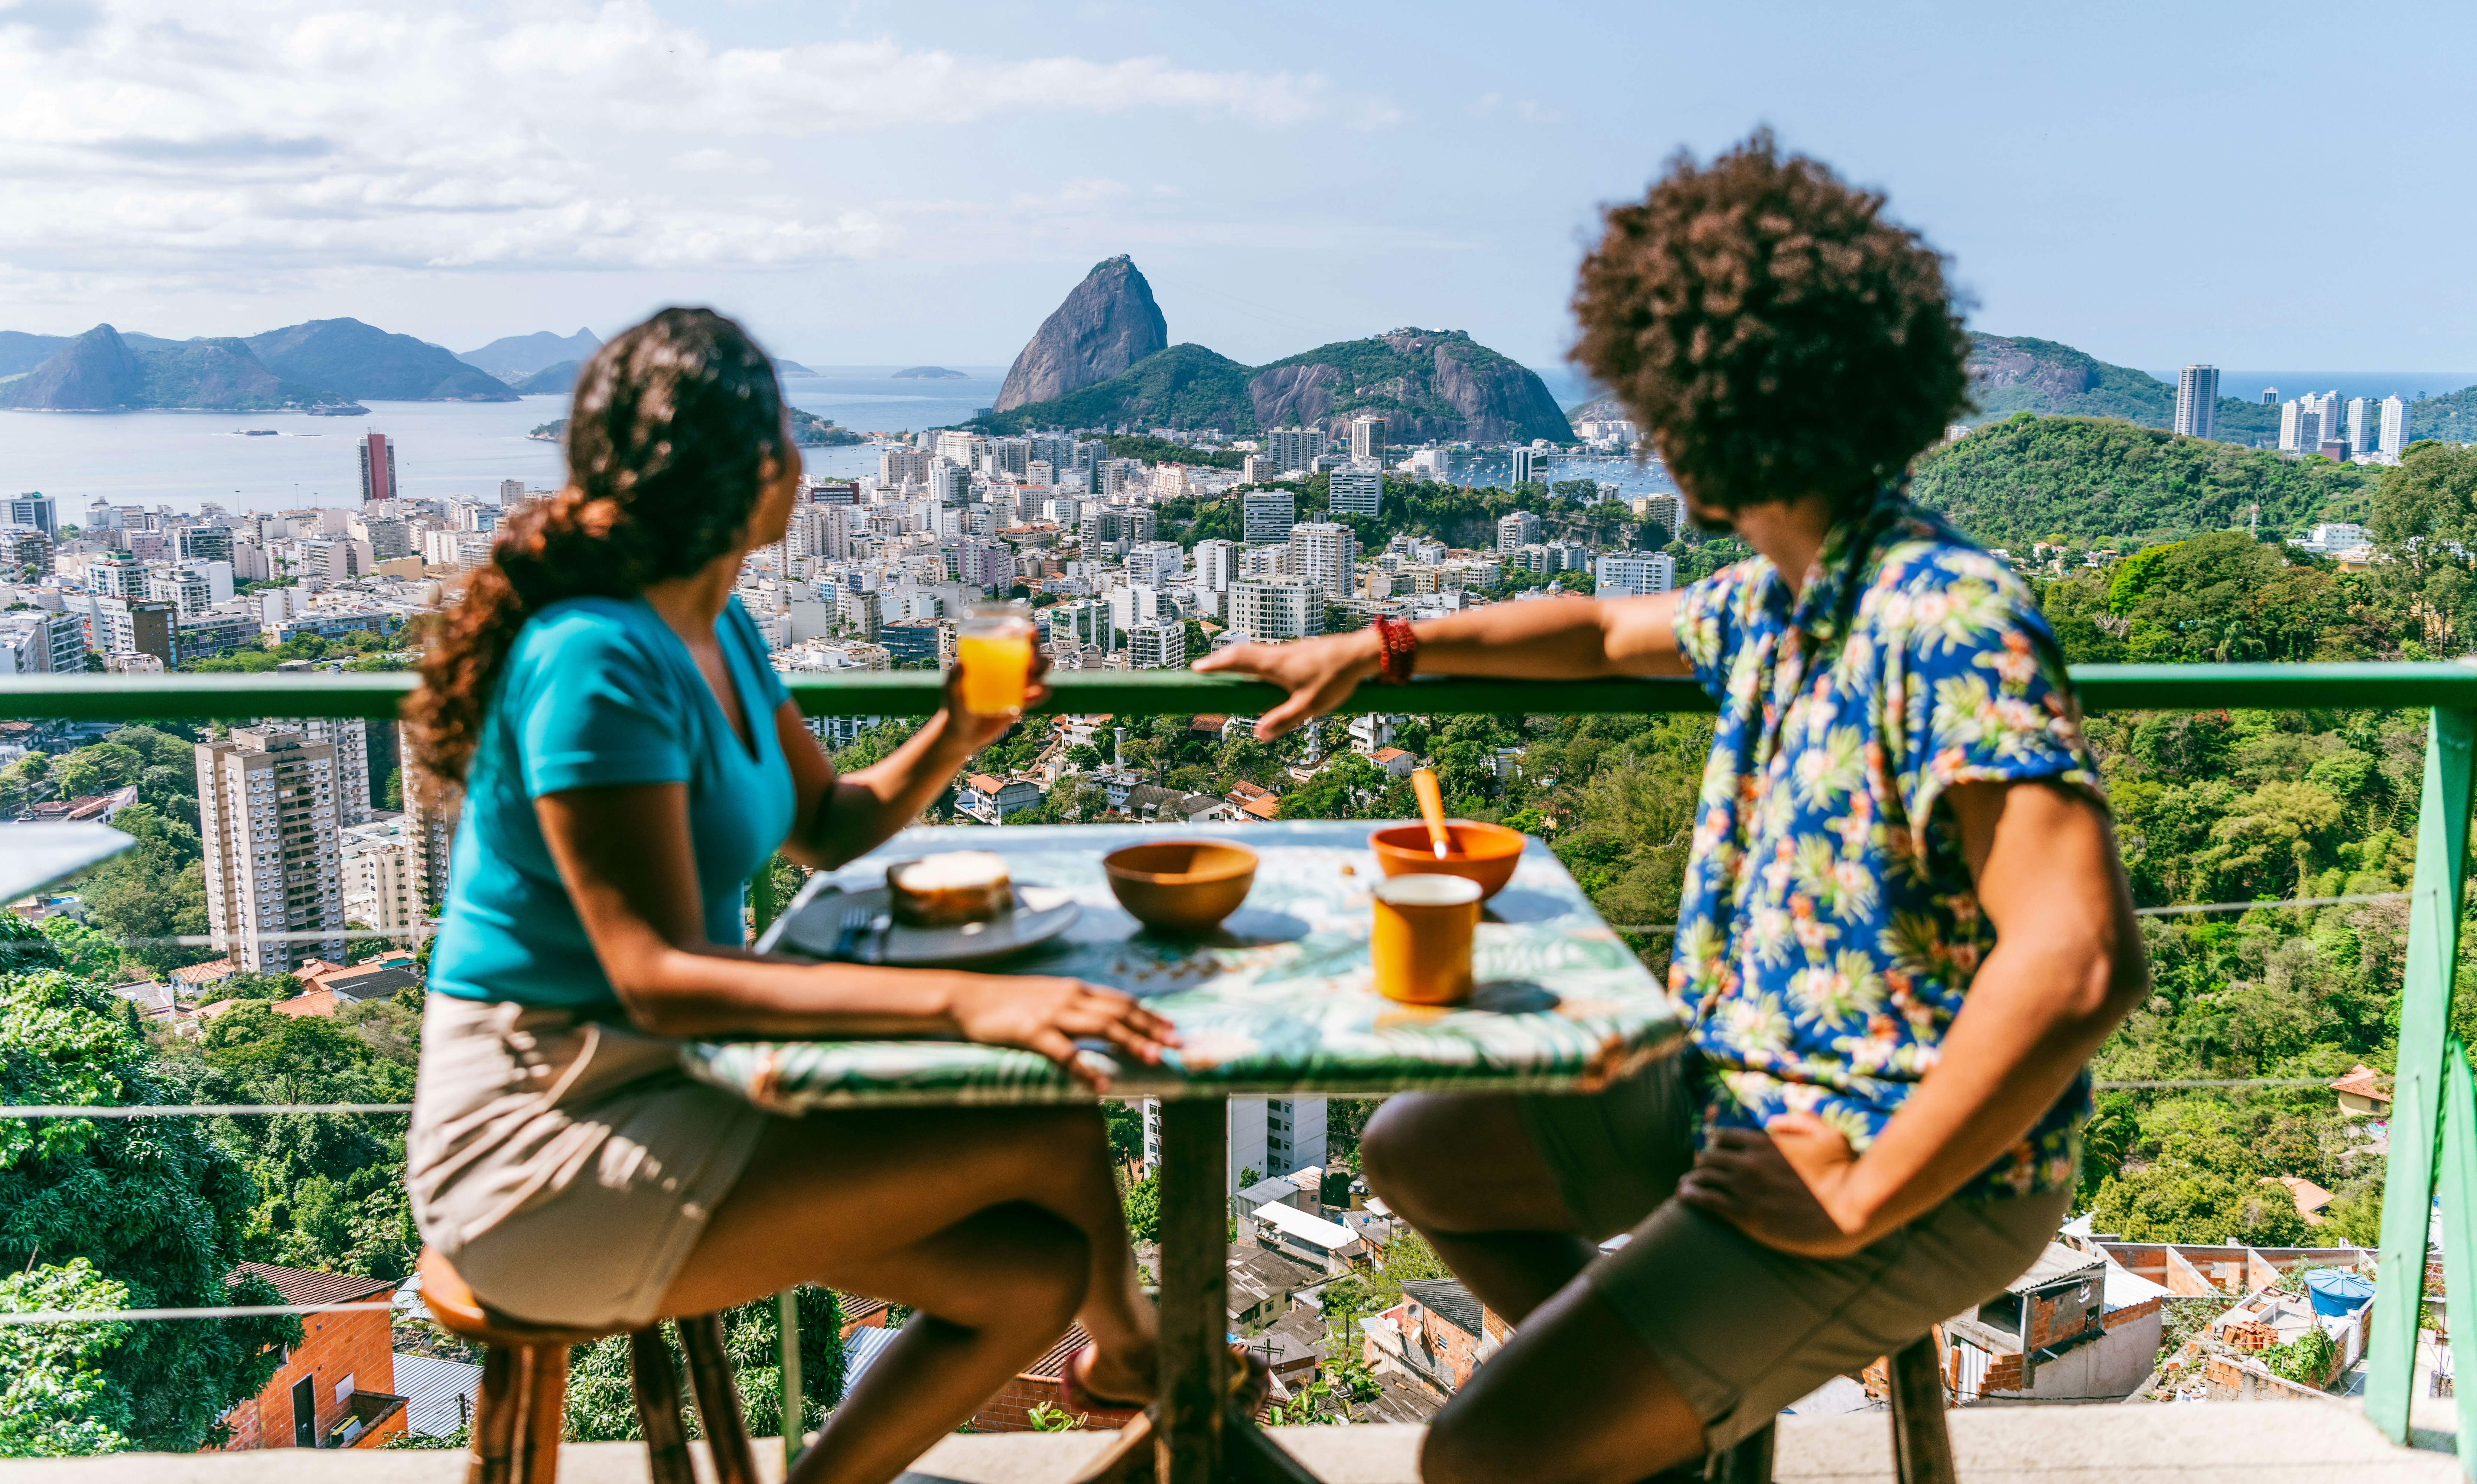 Man and woman on balcony enjoying lunch, elevated view of Rio de Janeiro.